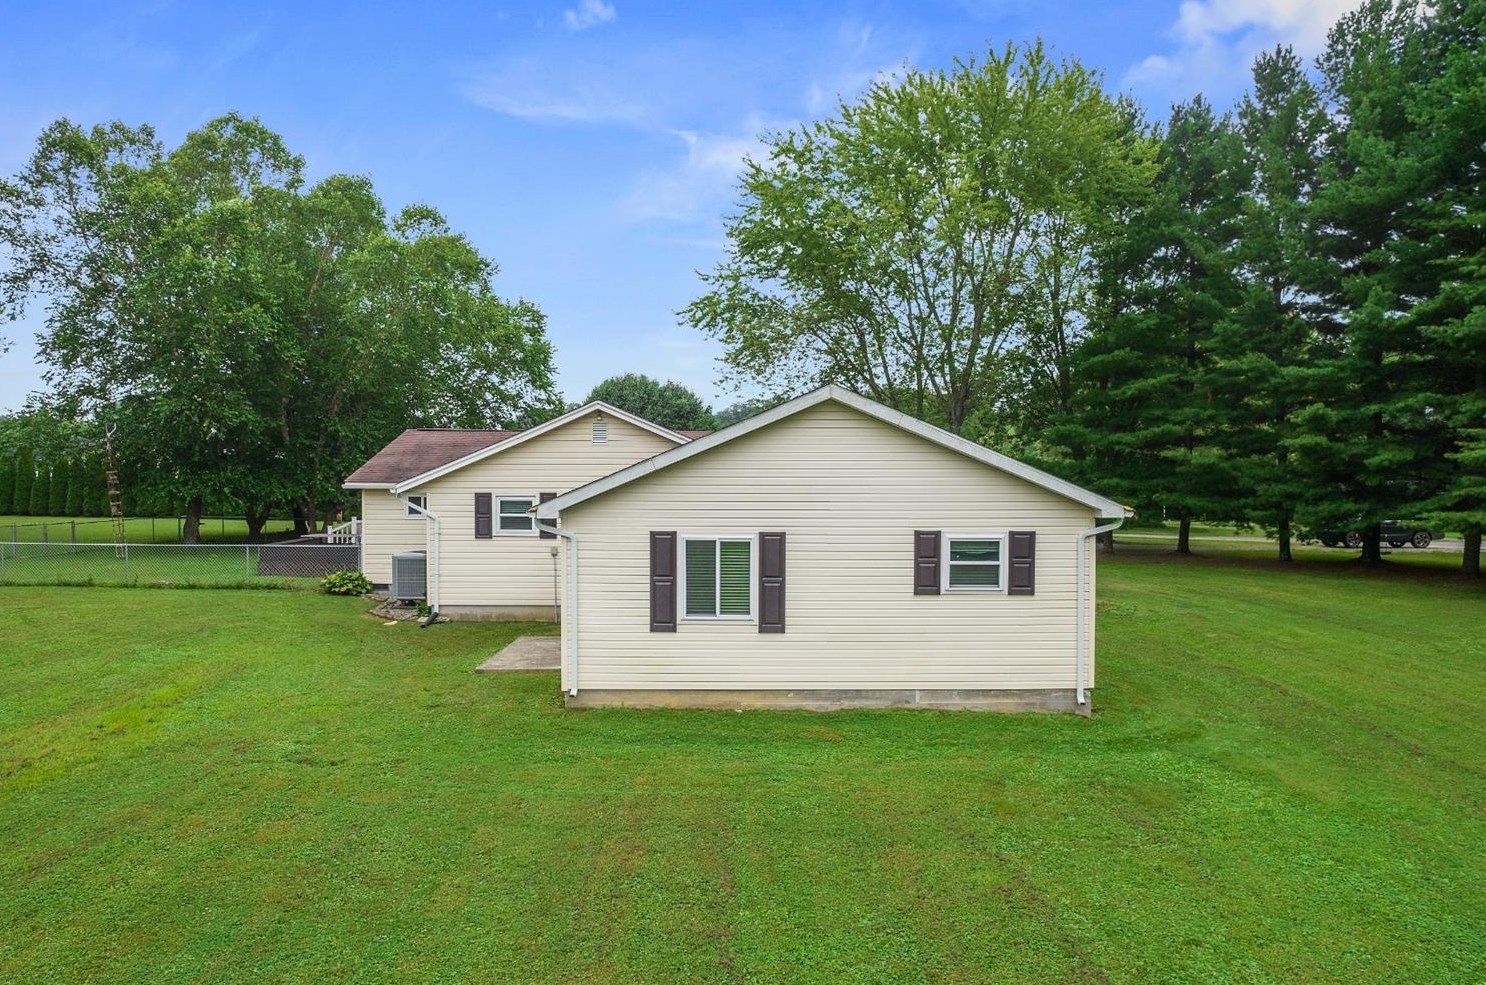 rentals in perry township ohio